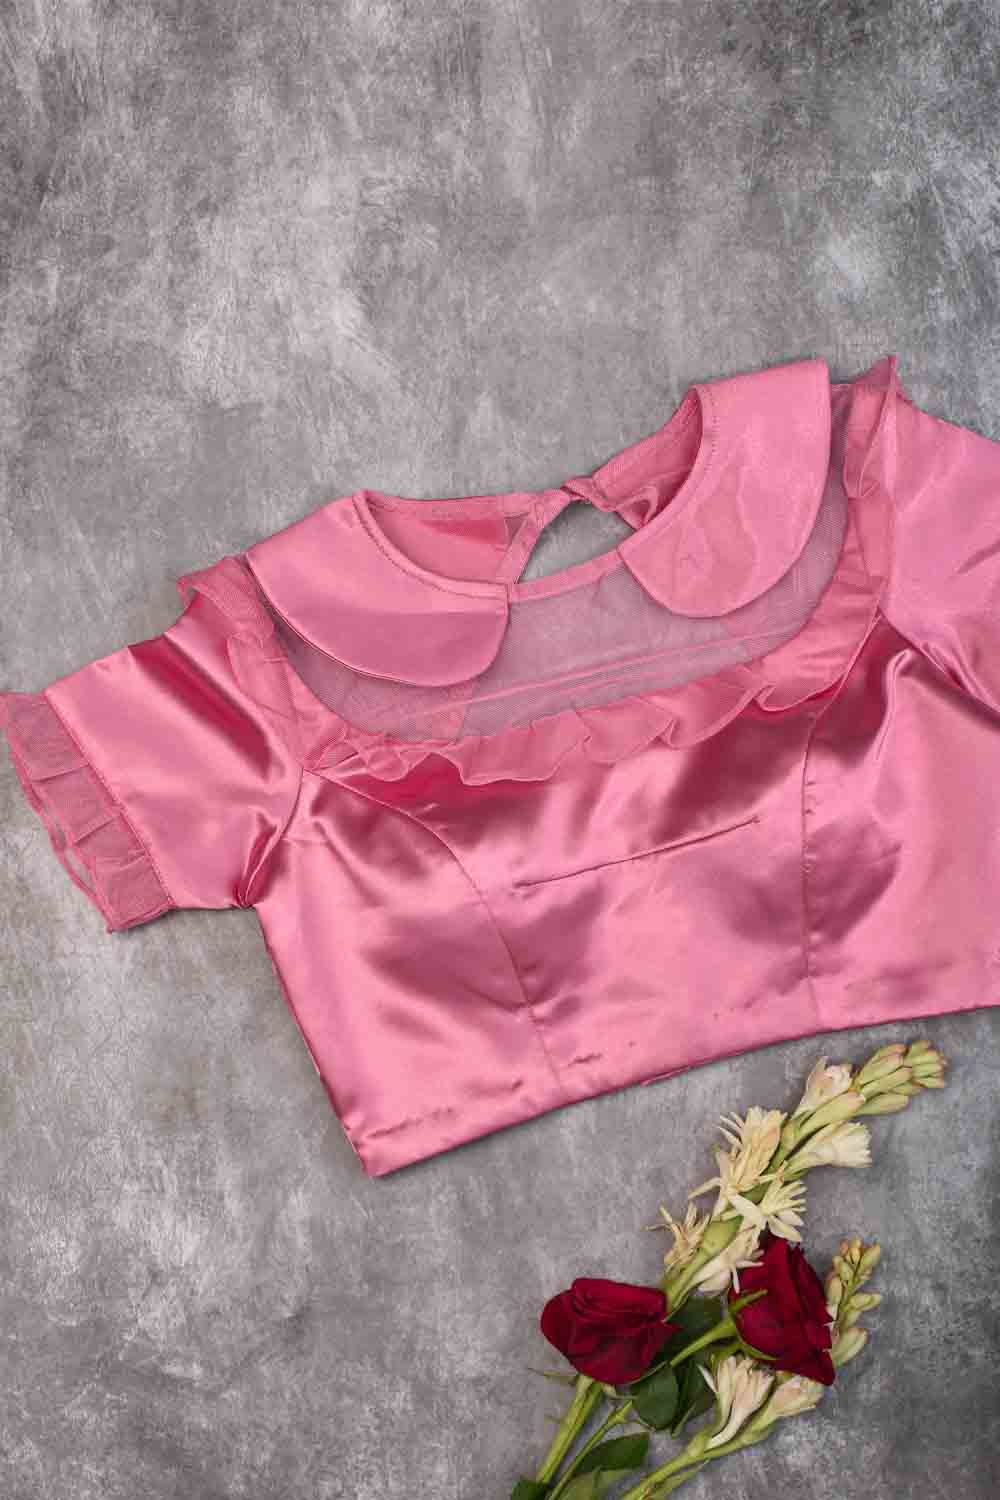 Candy pink satin peter pan blouse with net frill detailing